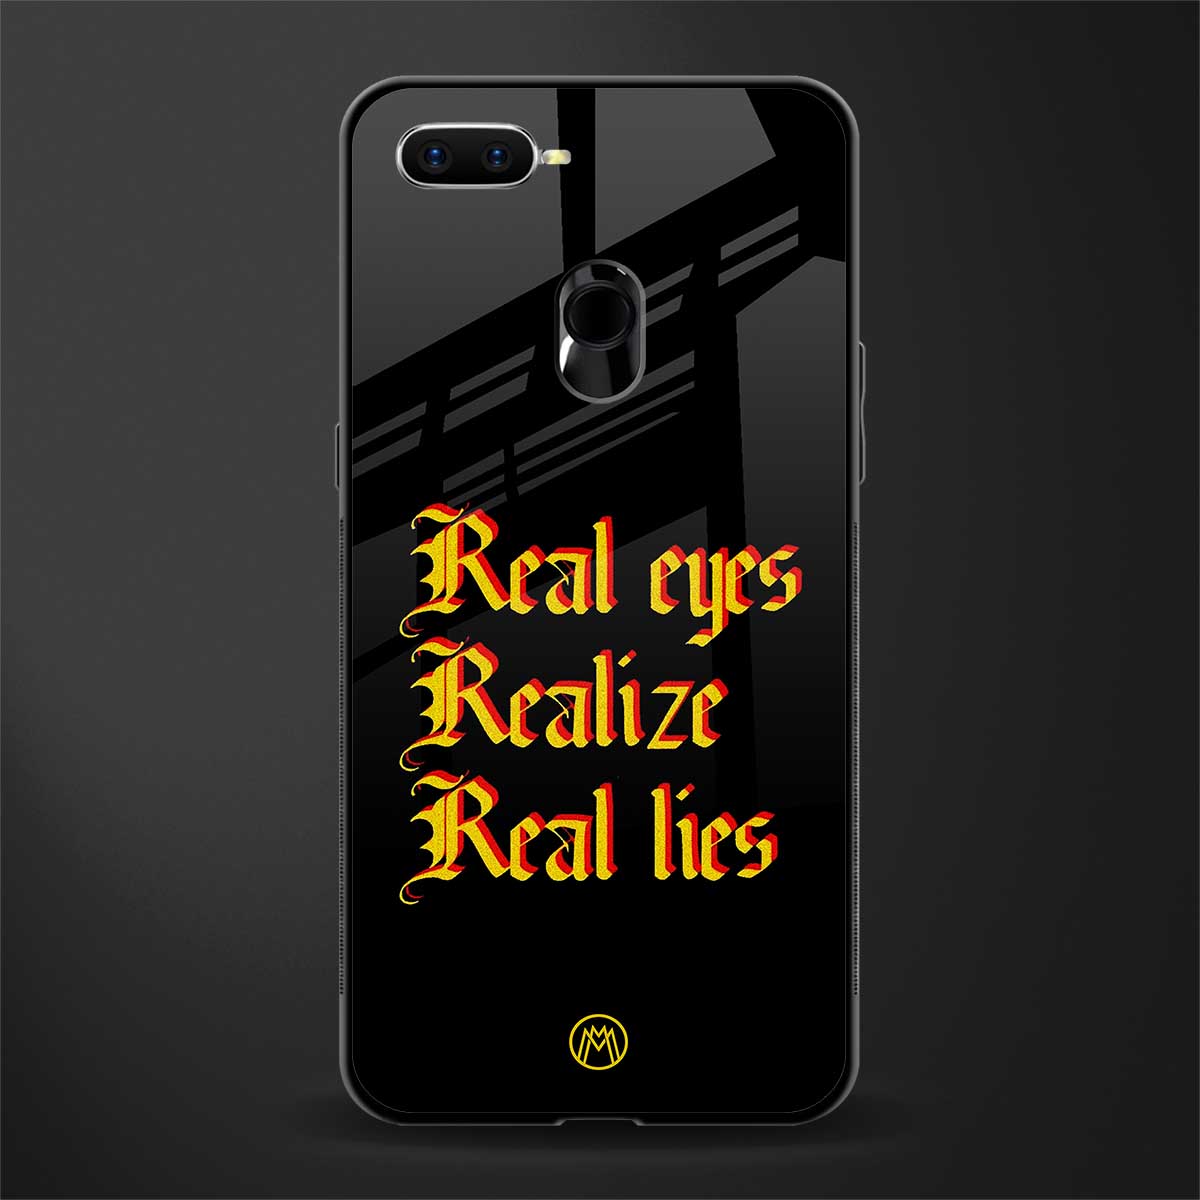 real eyes realize real lies quote glass case for oppo a7 image